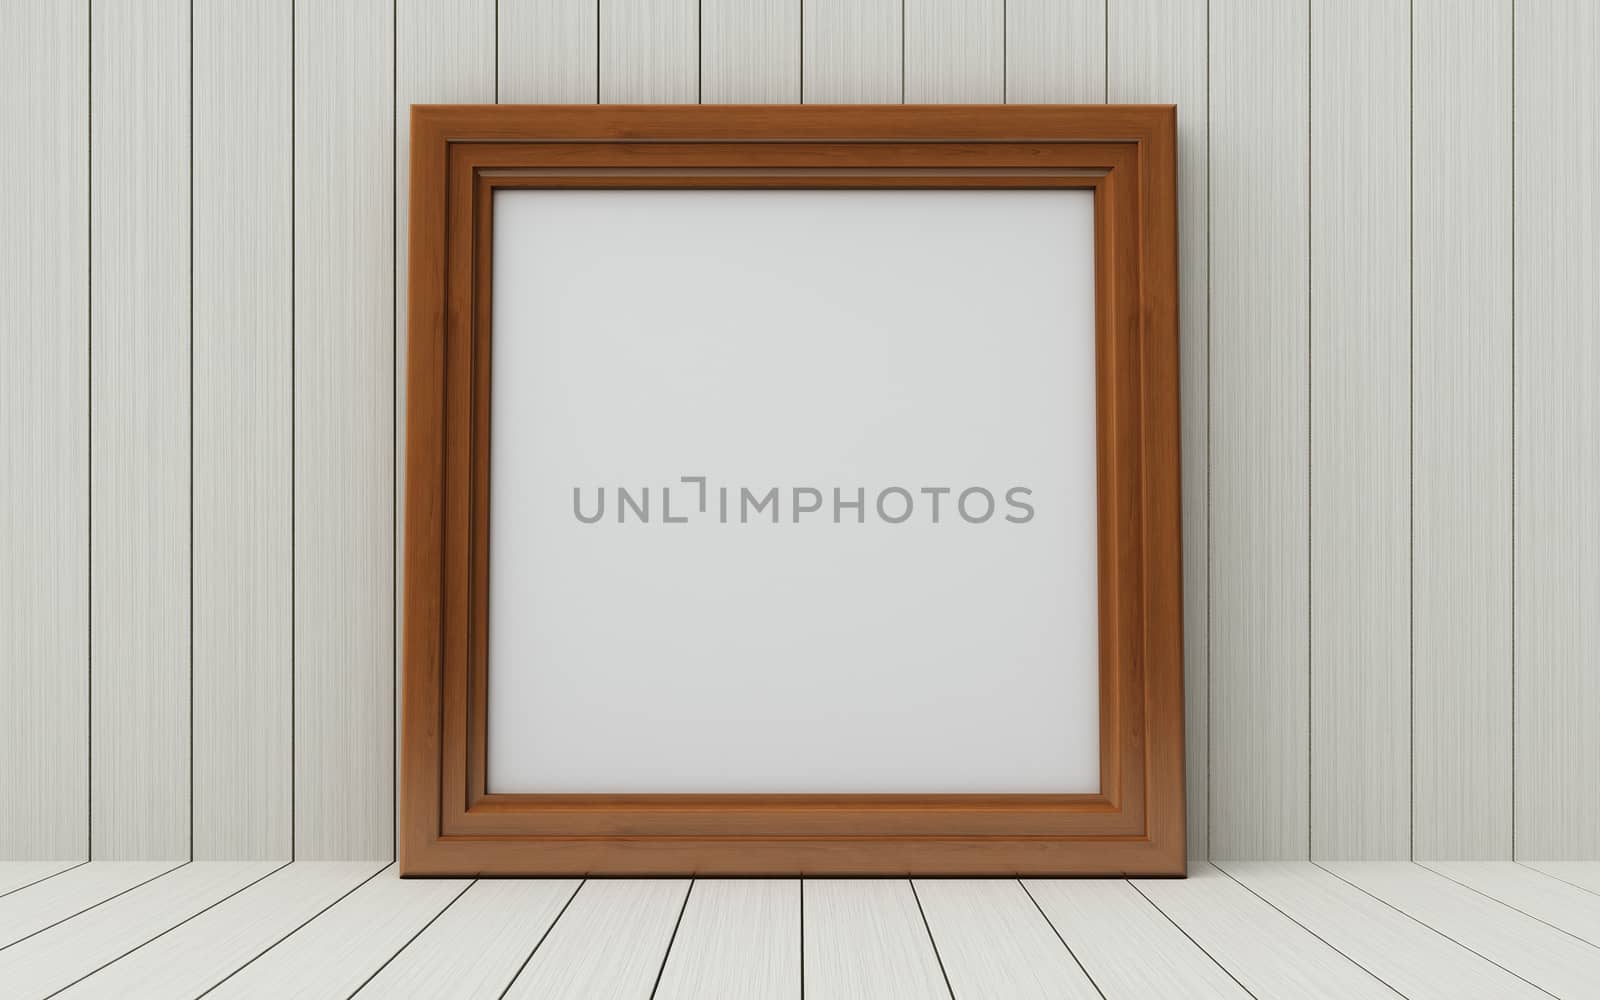 Realistic picture frame on wood background, Perfect for your presentations.